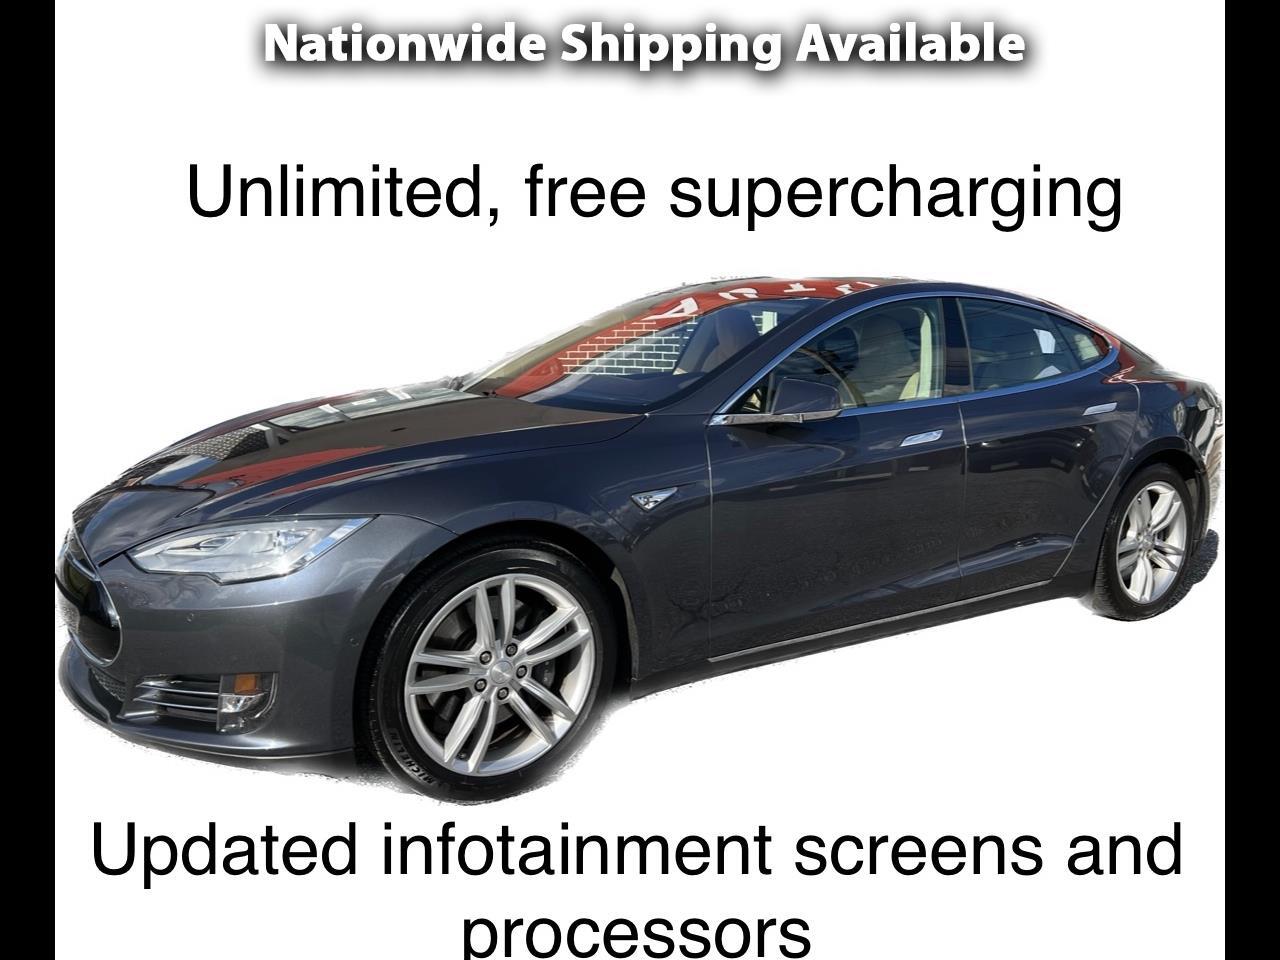 Tesla Model S 4dr Sdn 85 kWh Battery 2014